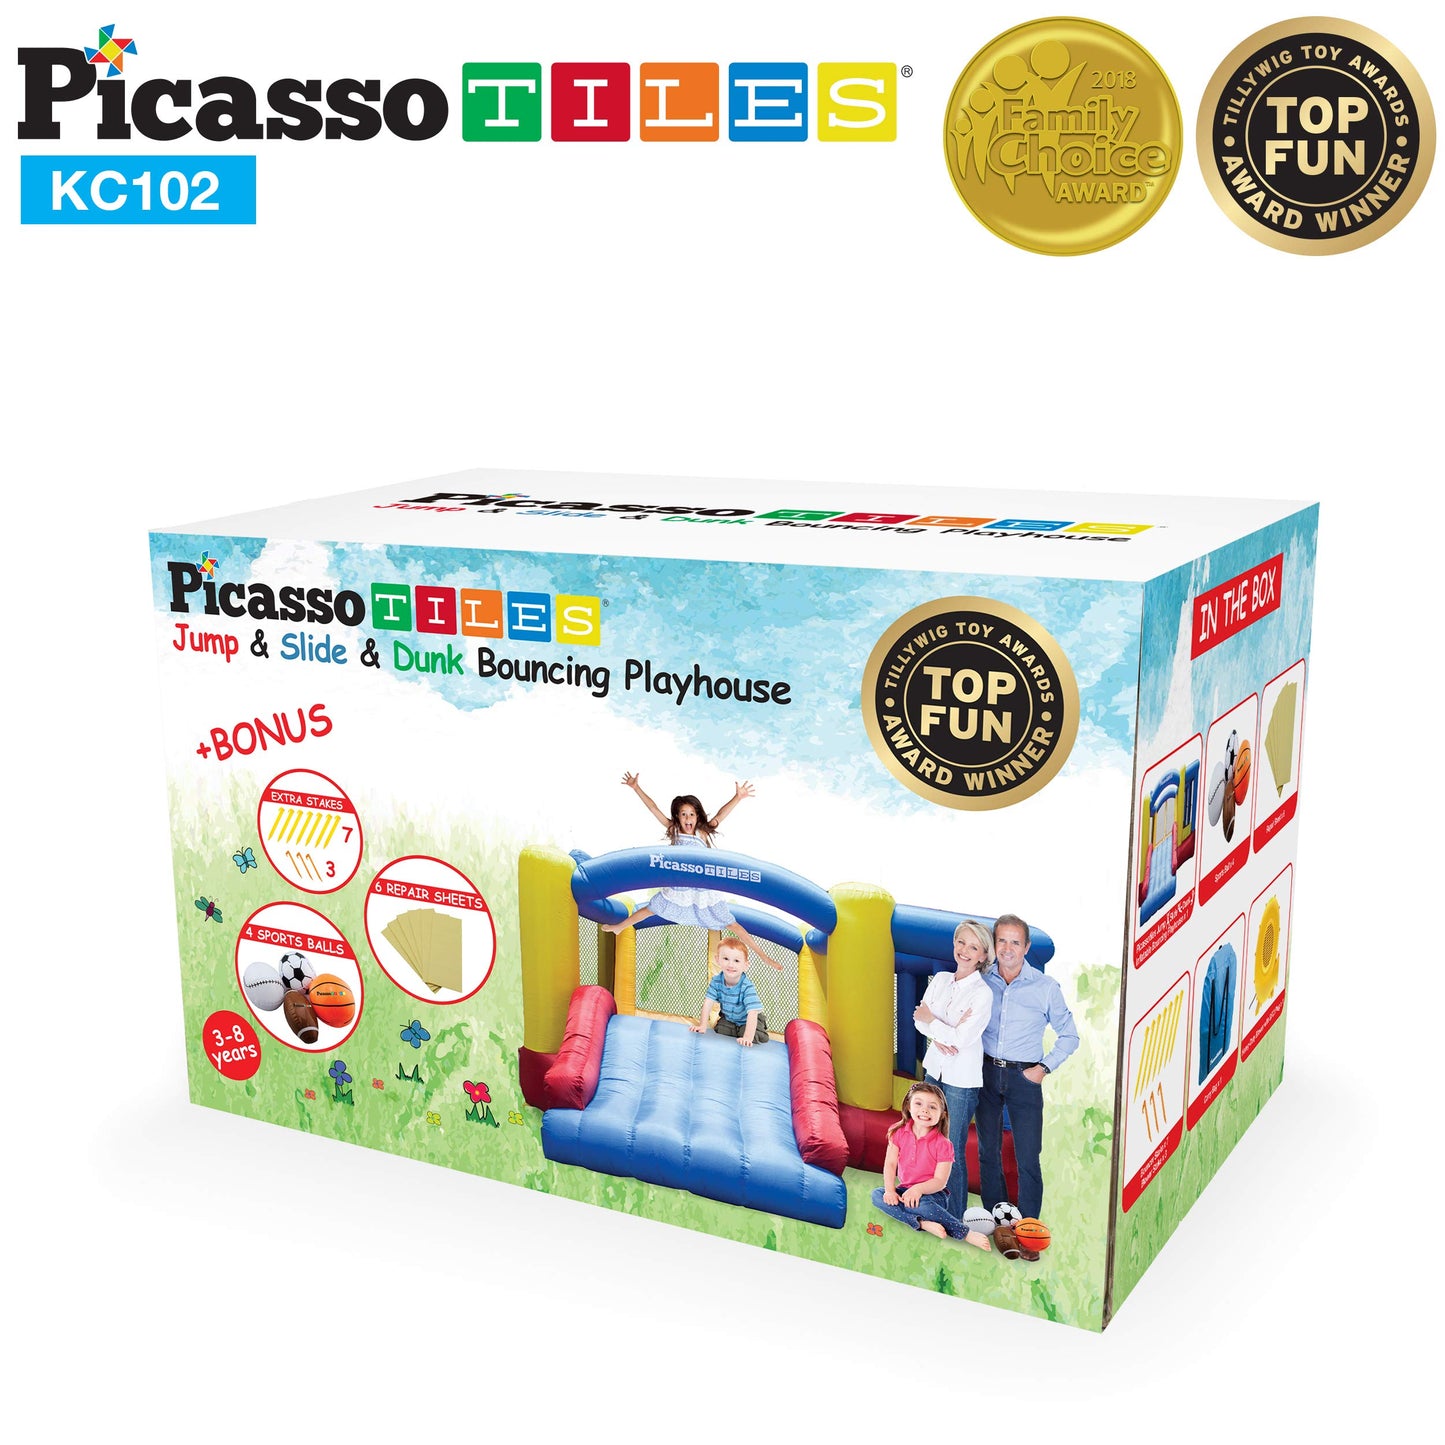 [Version de mise à niveau] Picasso Toys KC102 12 x 10 pieds Gonflable Bouncer Jumping Bouncer House, Jump Slide, Dunk Playhouse w/ Basketball Rim, 4 Sports Balls, Full-Size Entry, 580W ETL Certified Blower Bounce House102